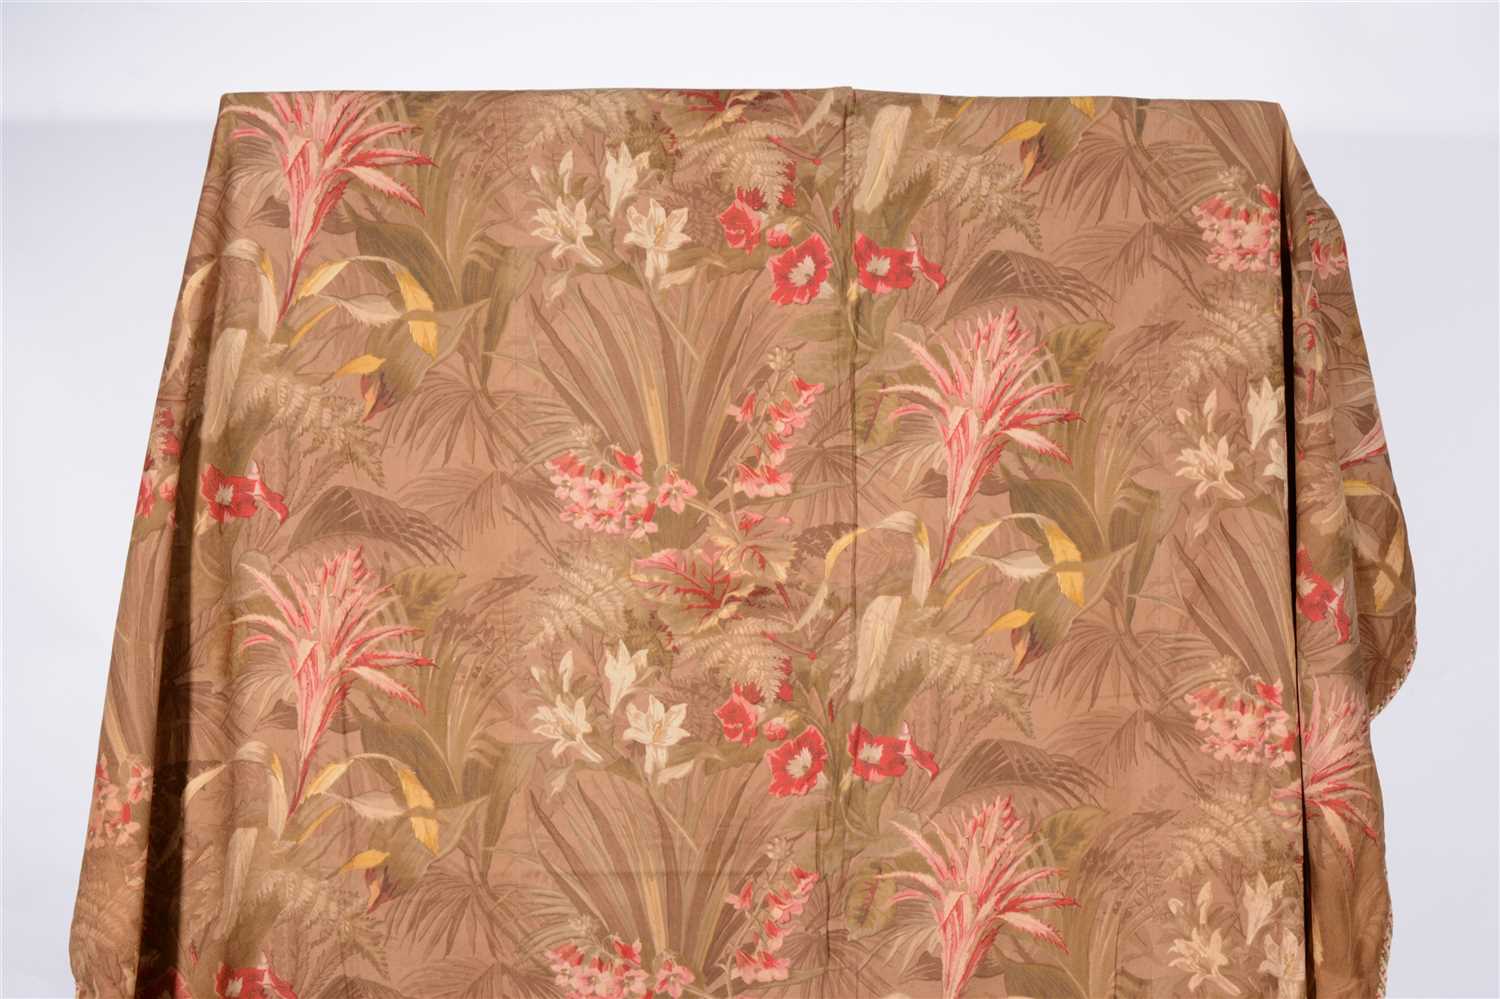 Lot 183 - Two curtains printed design on woven fabric, width 90" drop 108"